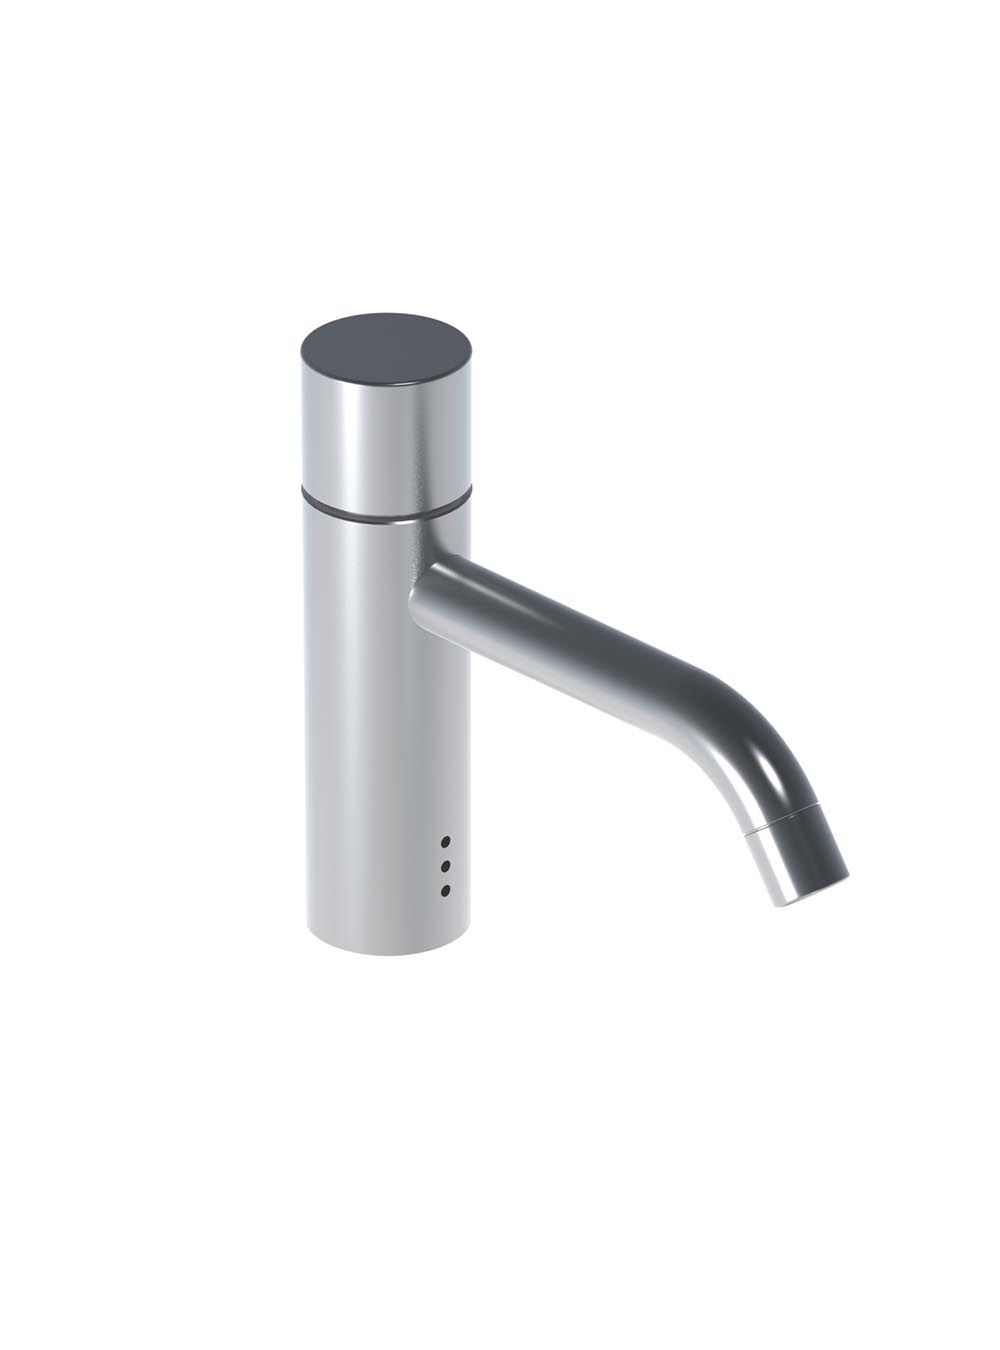 RB1EN/150: Basin pillar tap with on-off sensor for ‘hands free’ operation, with an external mains transformer a